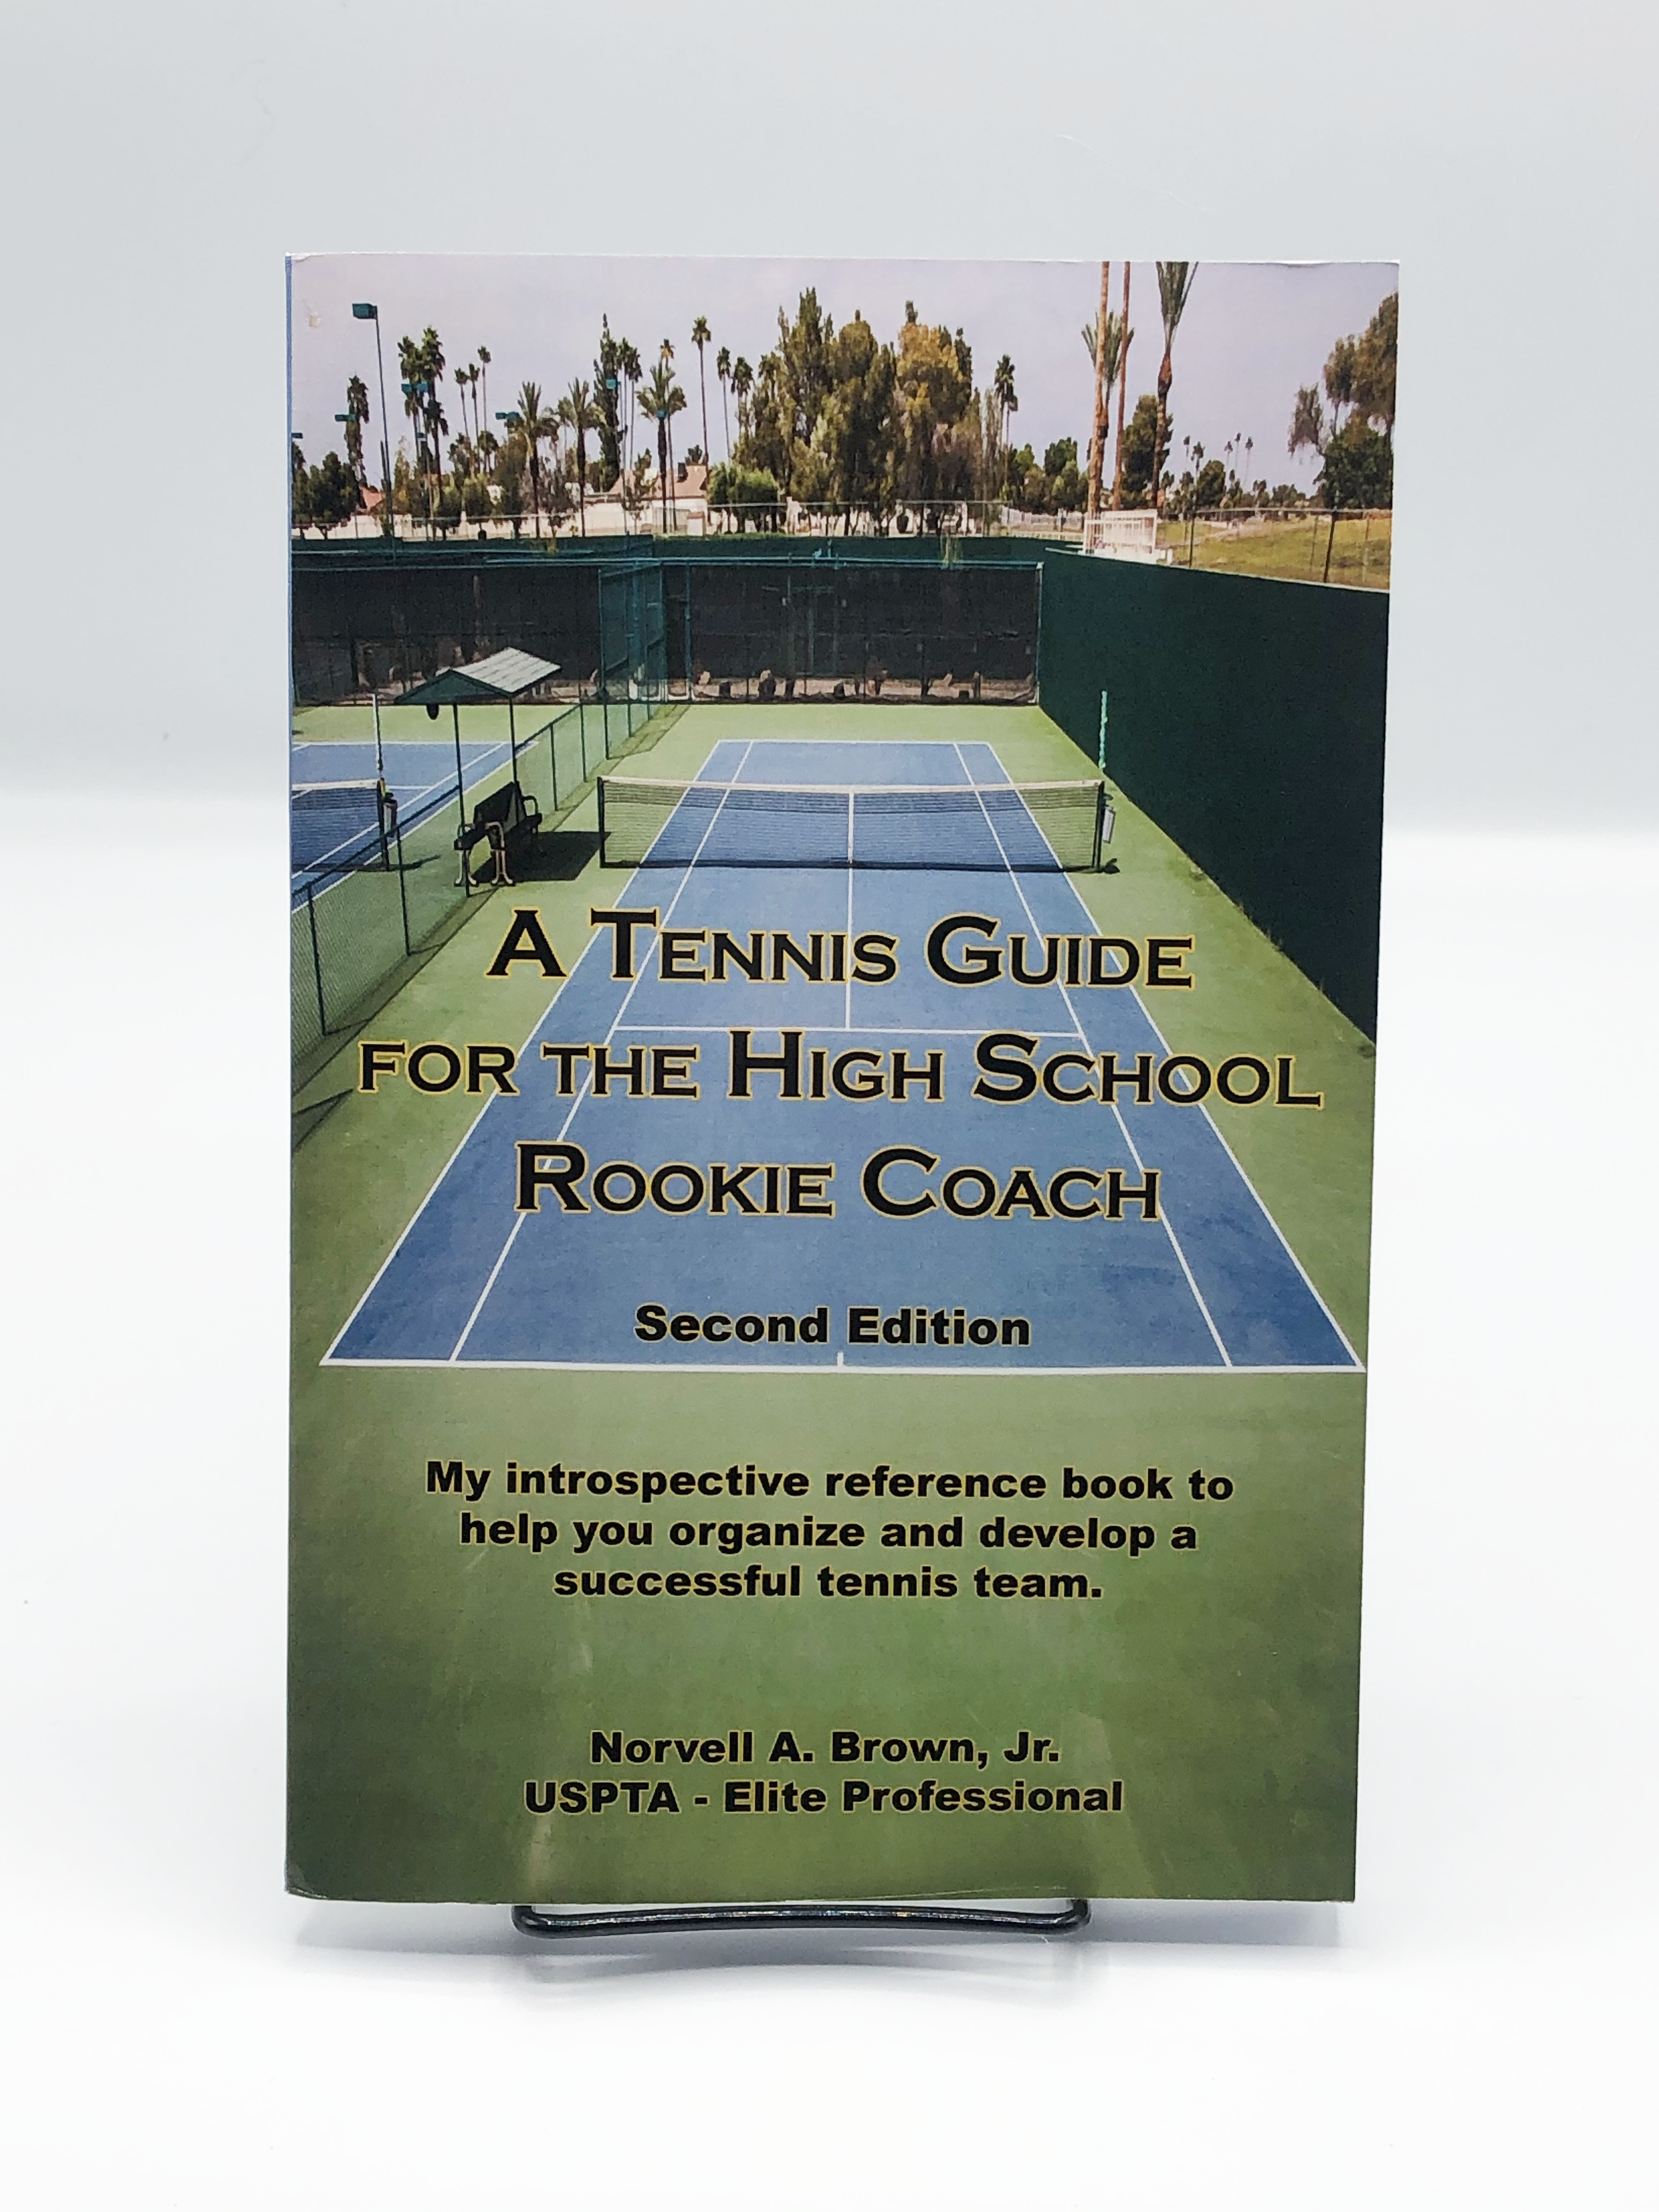 *A Tennis Guide For The High School Rookie Coach 2nd Edition